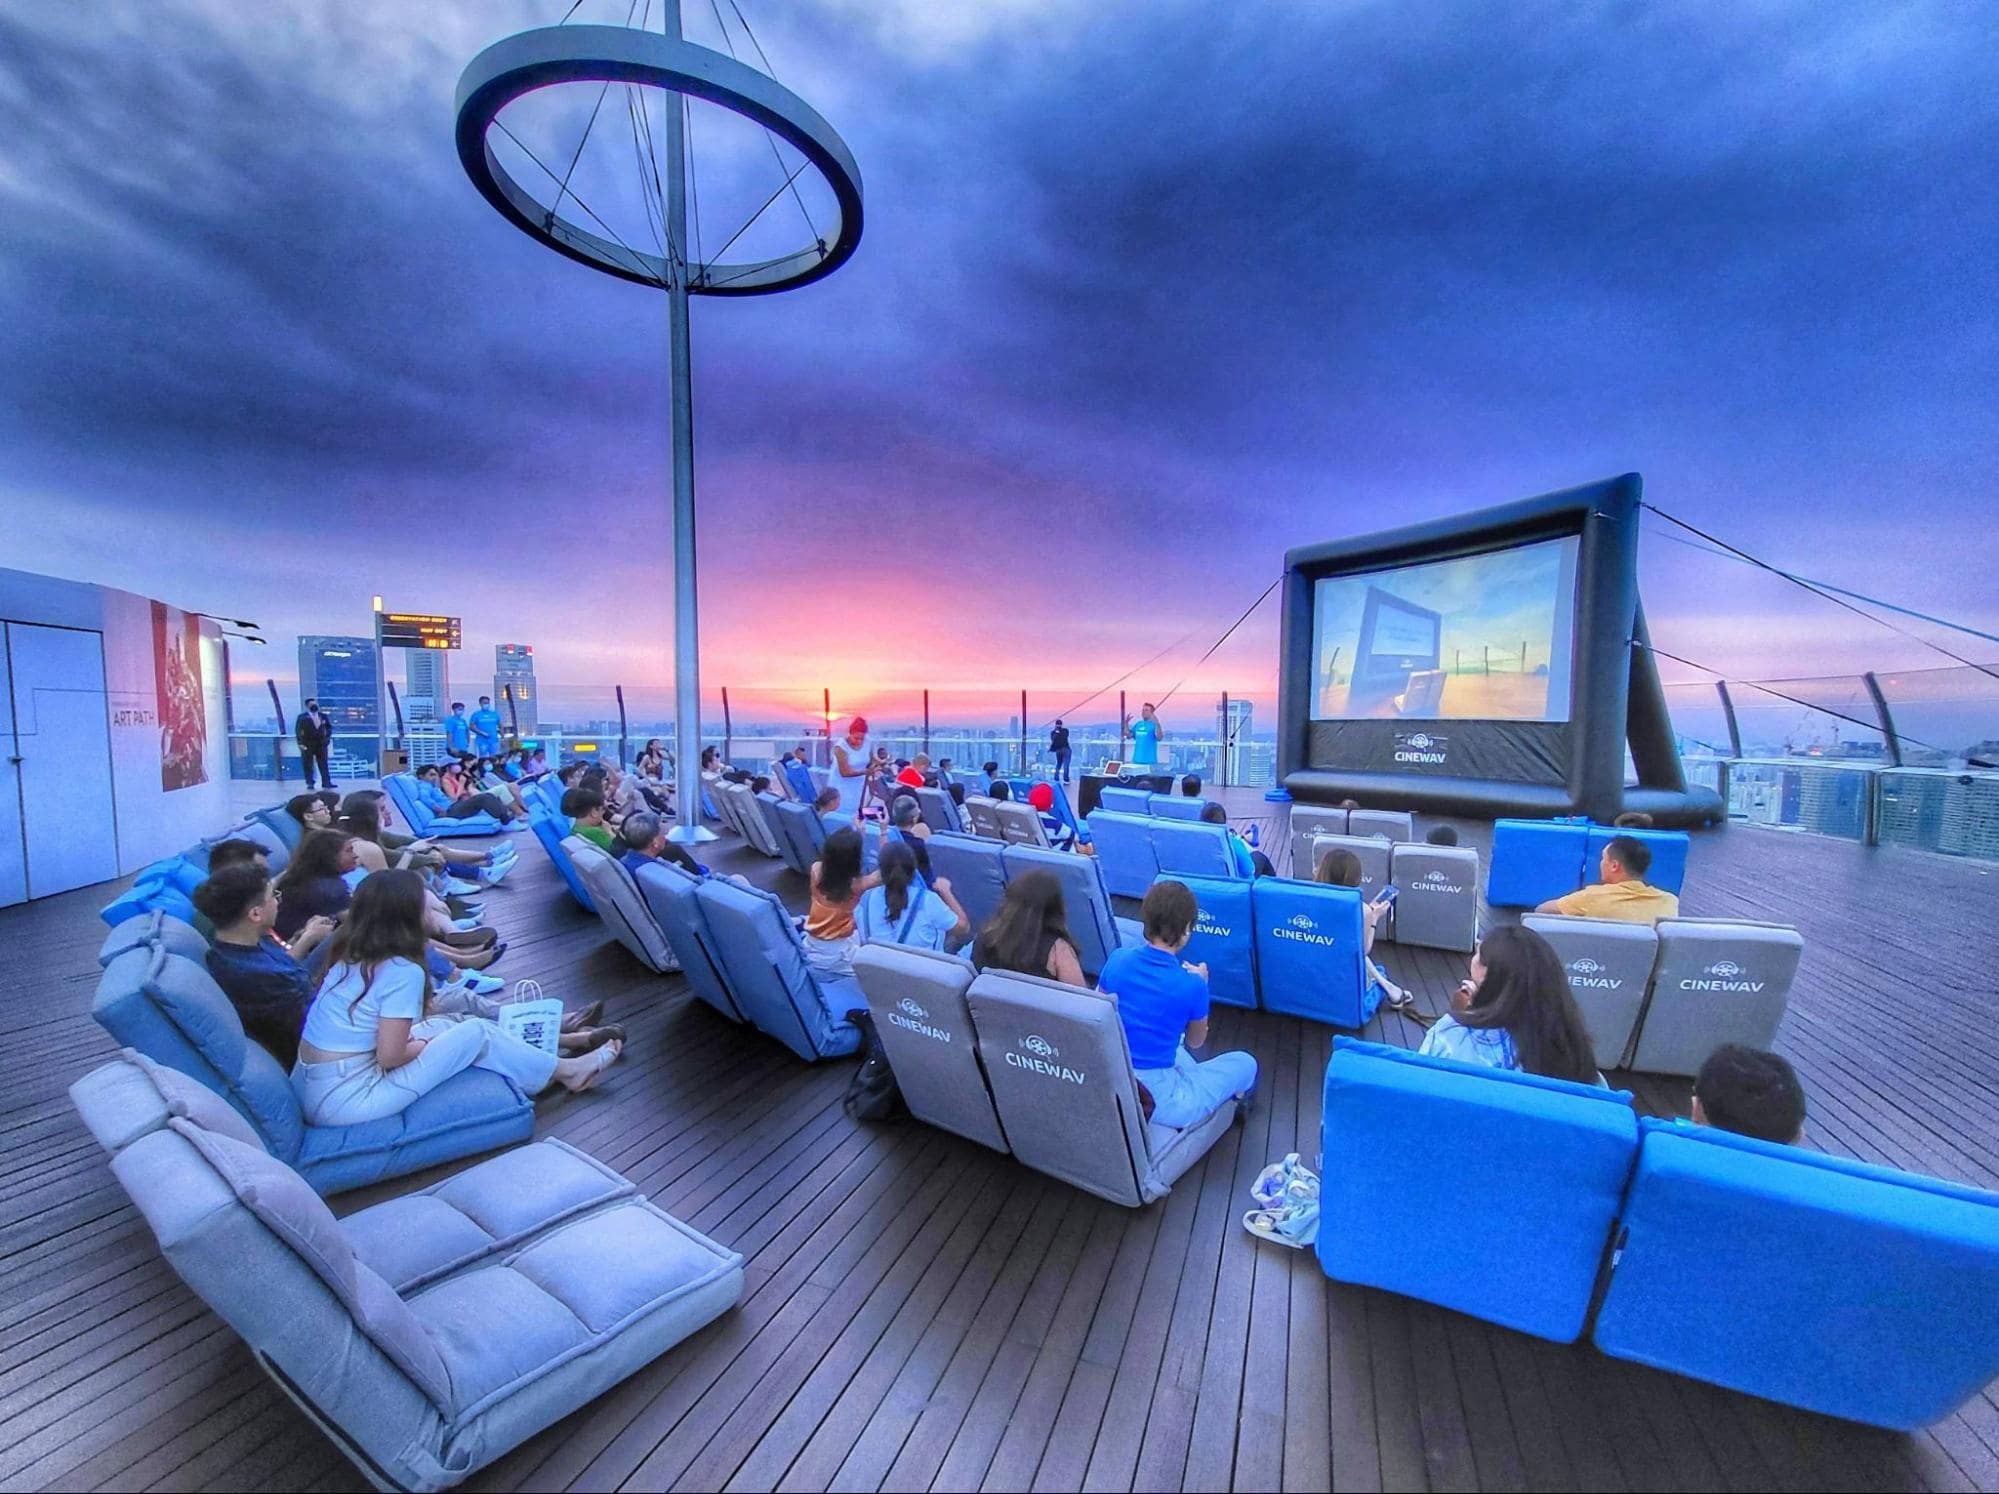 Movies in the sky - outdoor cinema